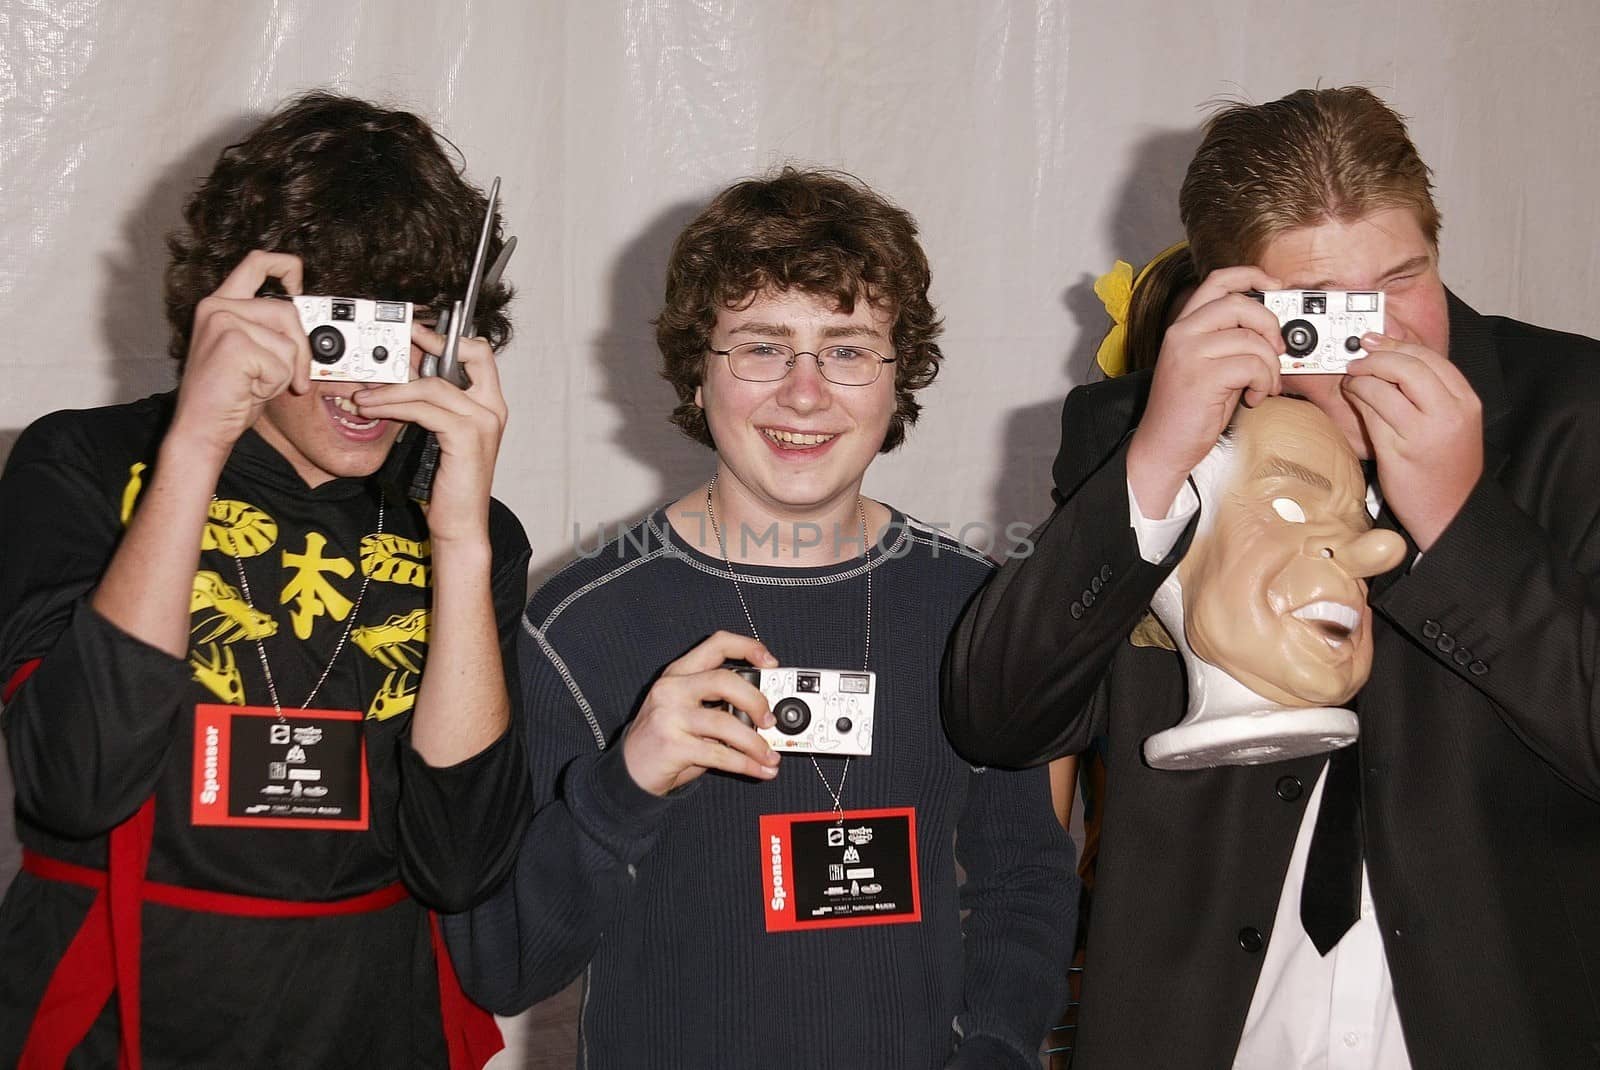 Jack De Sena, Kyle Sullivan and Shane Lyons at the 10th Annual Dream Halloween benefitting the Children Affected by AIDS Foundation, Barker Hanger, Santa Monica, CA 10-25-03